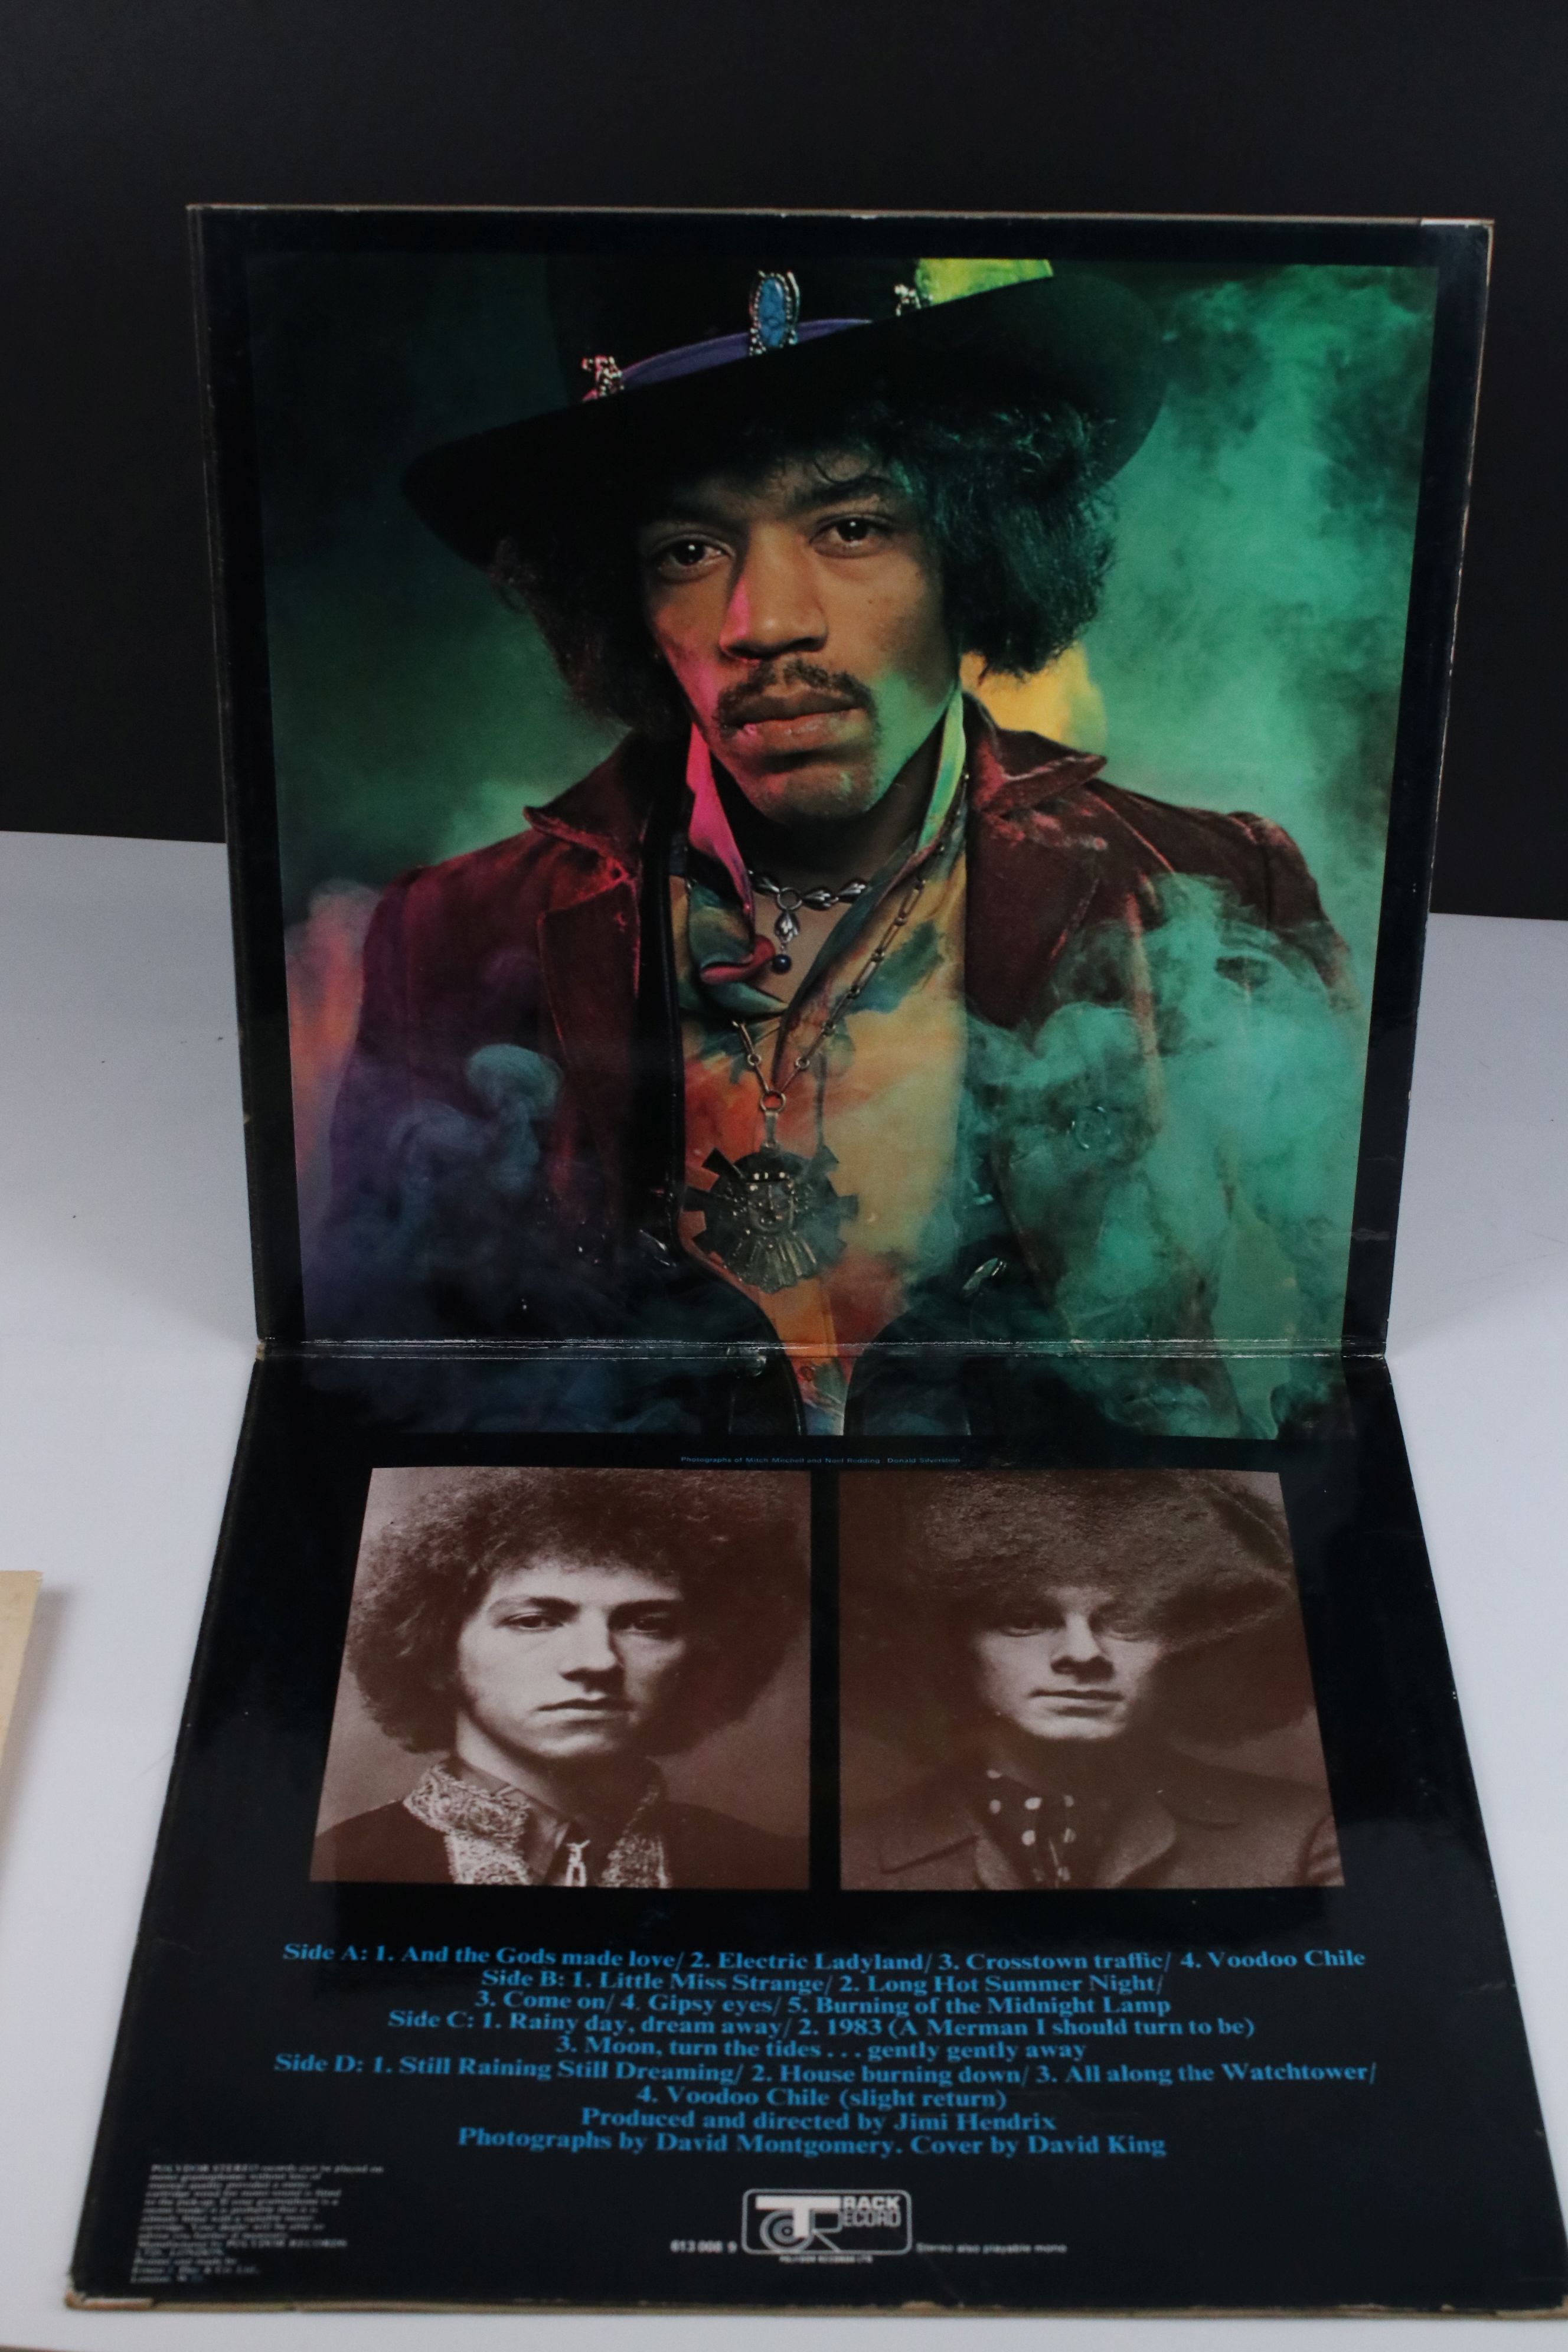 Vinyl - Jimi Hendrix Electric Ladyland on Track 61300819 blue text, Jimi to the right when - Image 8 of 9